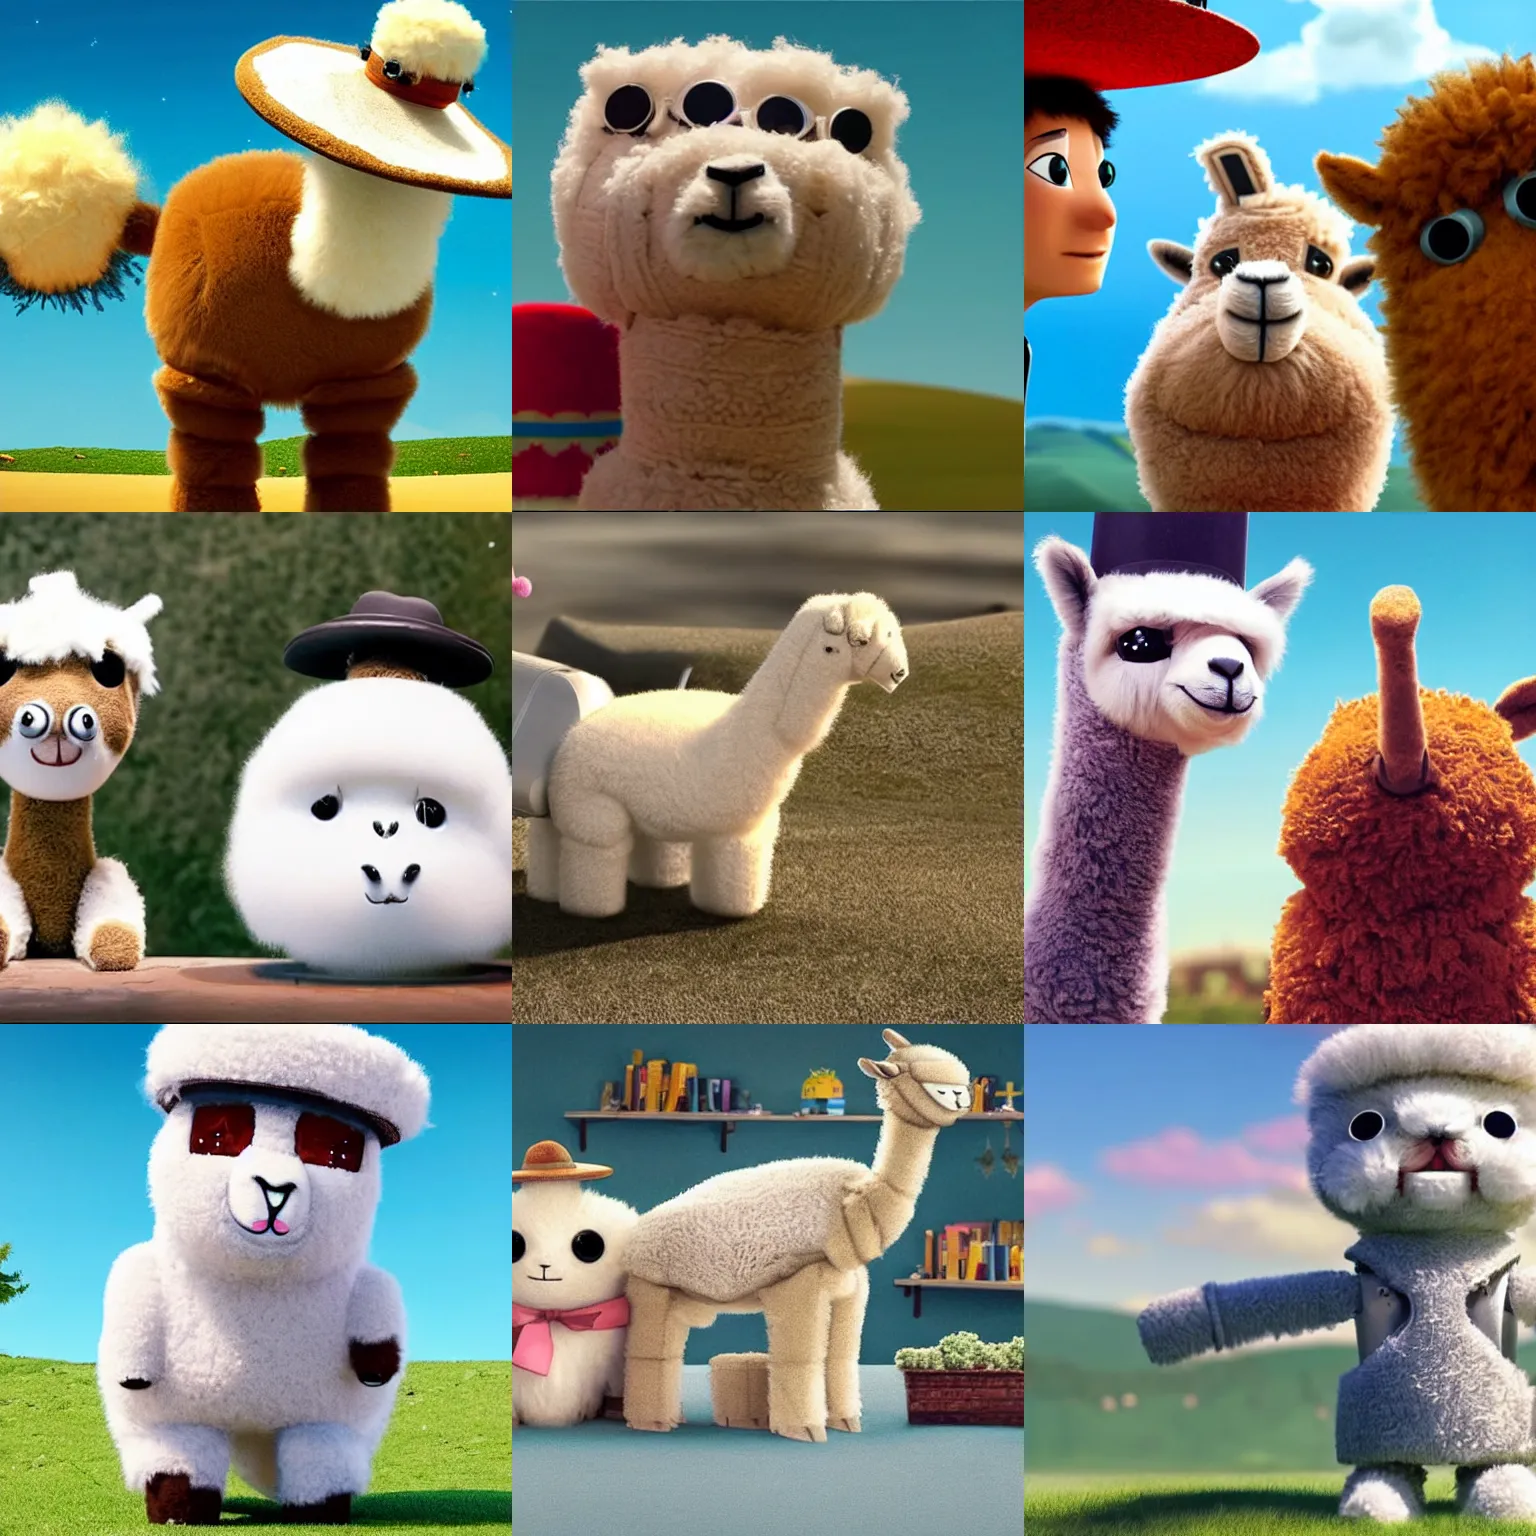 Prompt: an adorably fluffy robot alpaca wearing a sombrero looks very high, funny animated movie, award winning